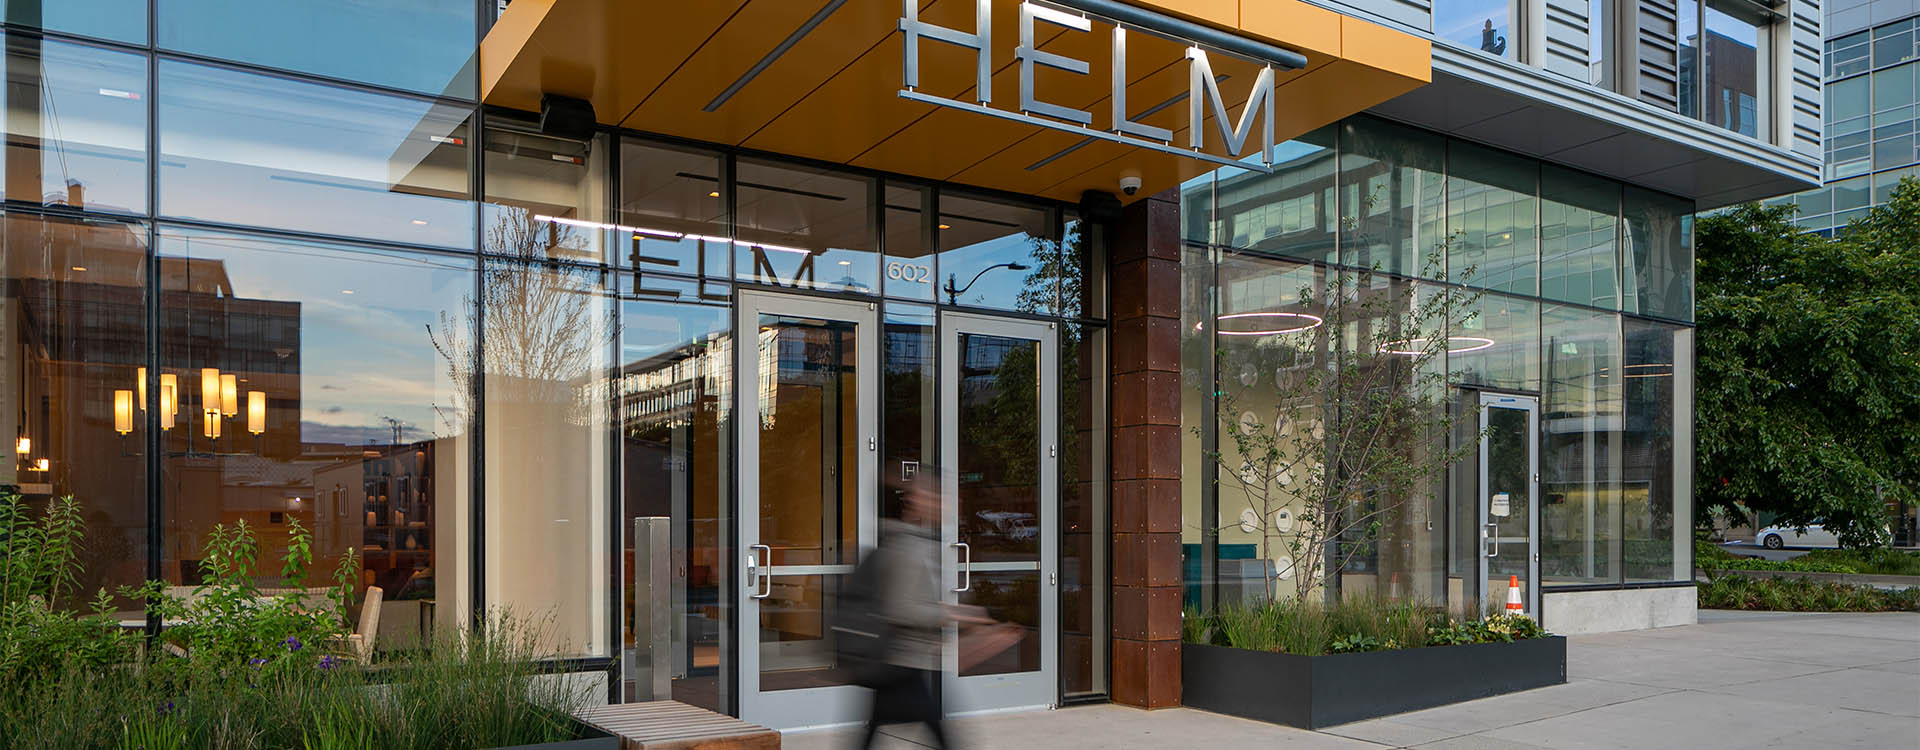 Entrance to Helm